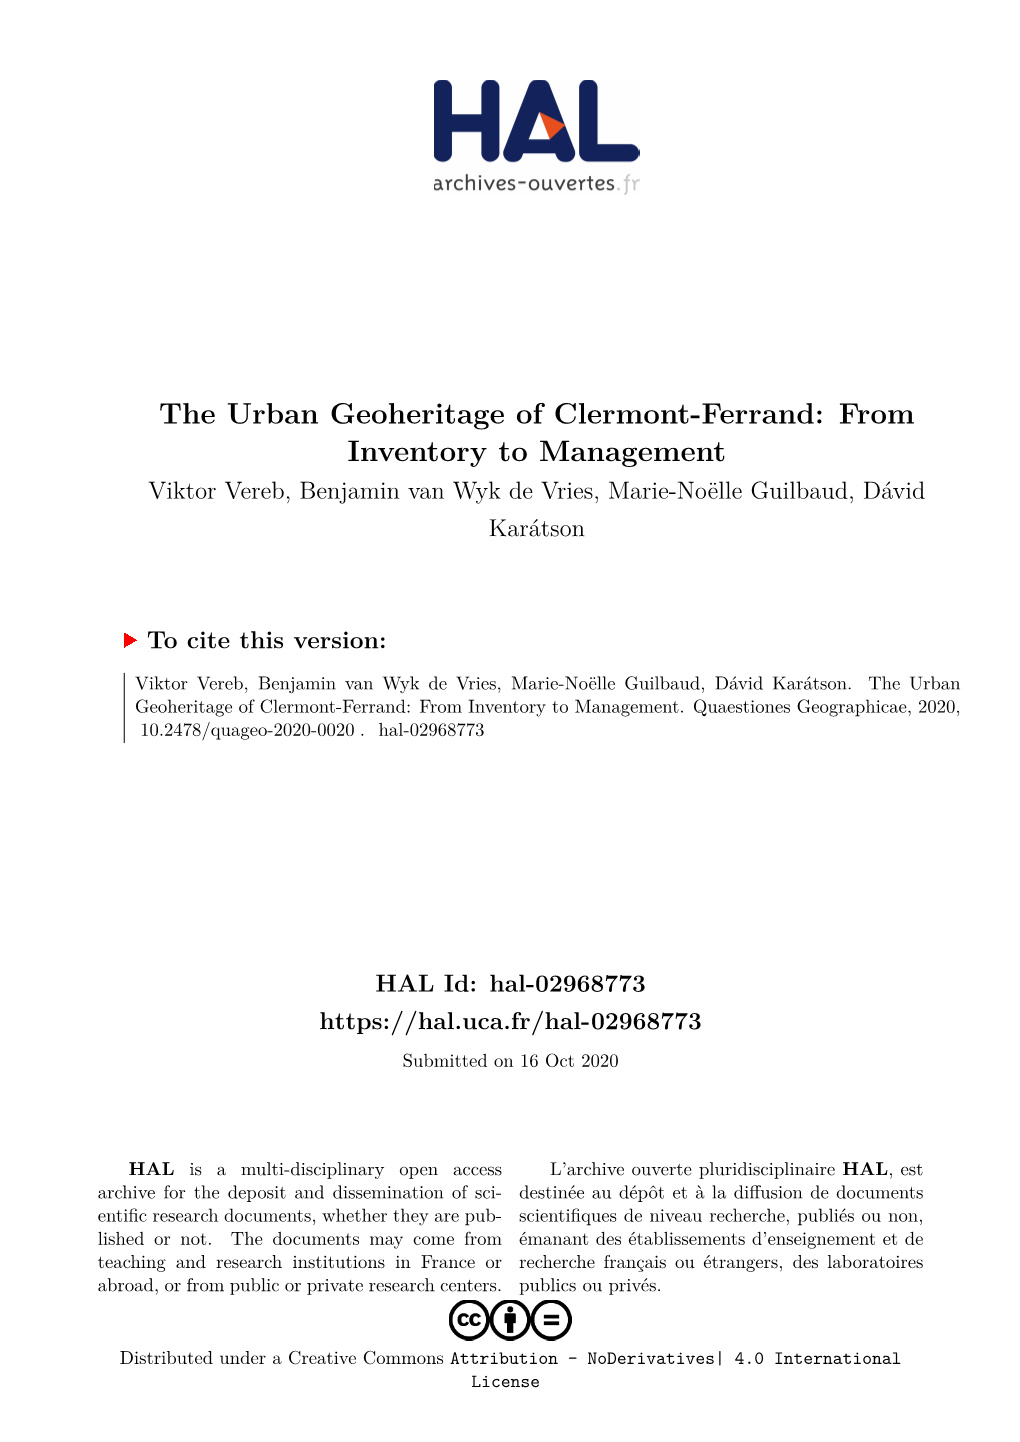 The Urban Geoheritage of Clermont-Ferrand: from Inventory to Management Viktor Vereb, Benjamin Van Wyk De Vries, Marie-Noëlle Guilbaud, Dávid Karátson